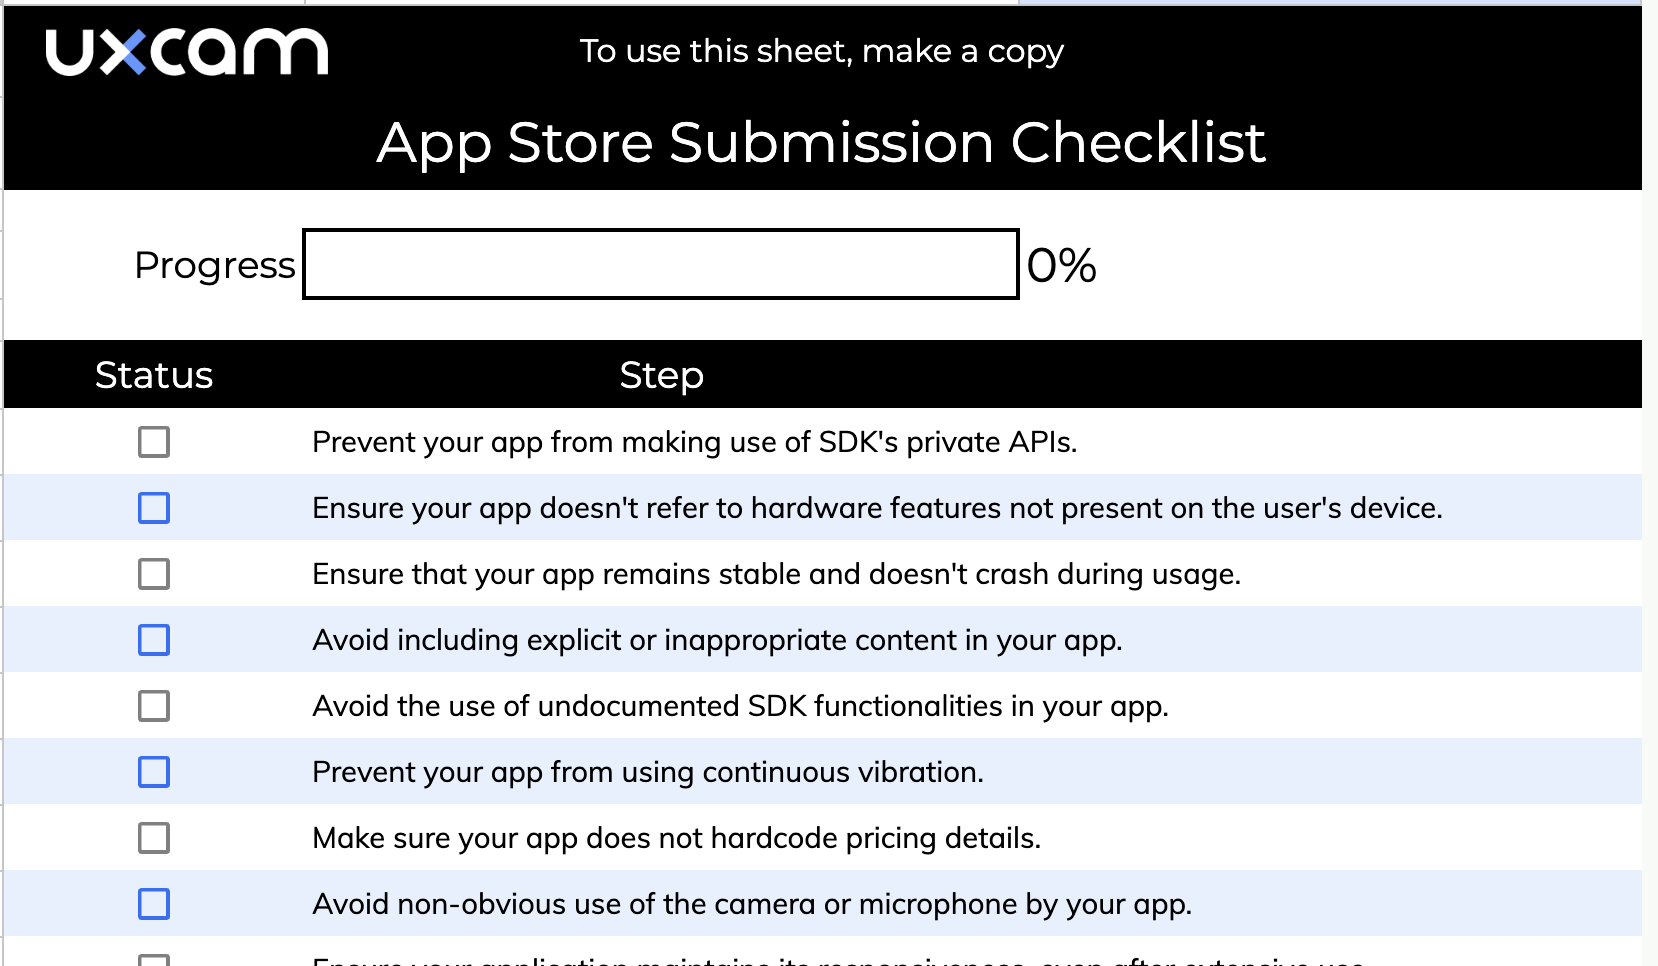 App Store Submission Checklist